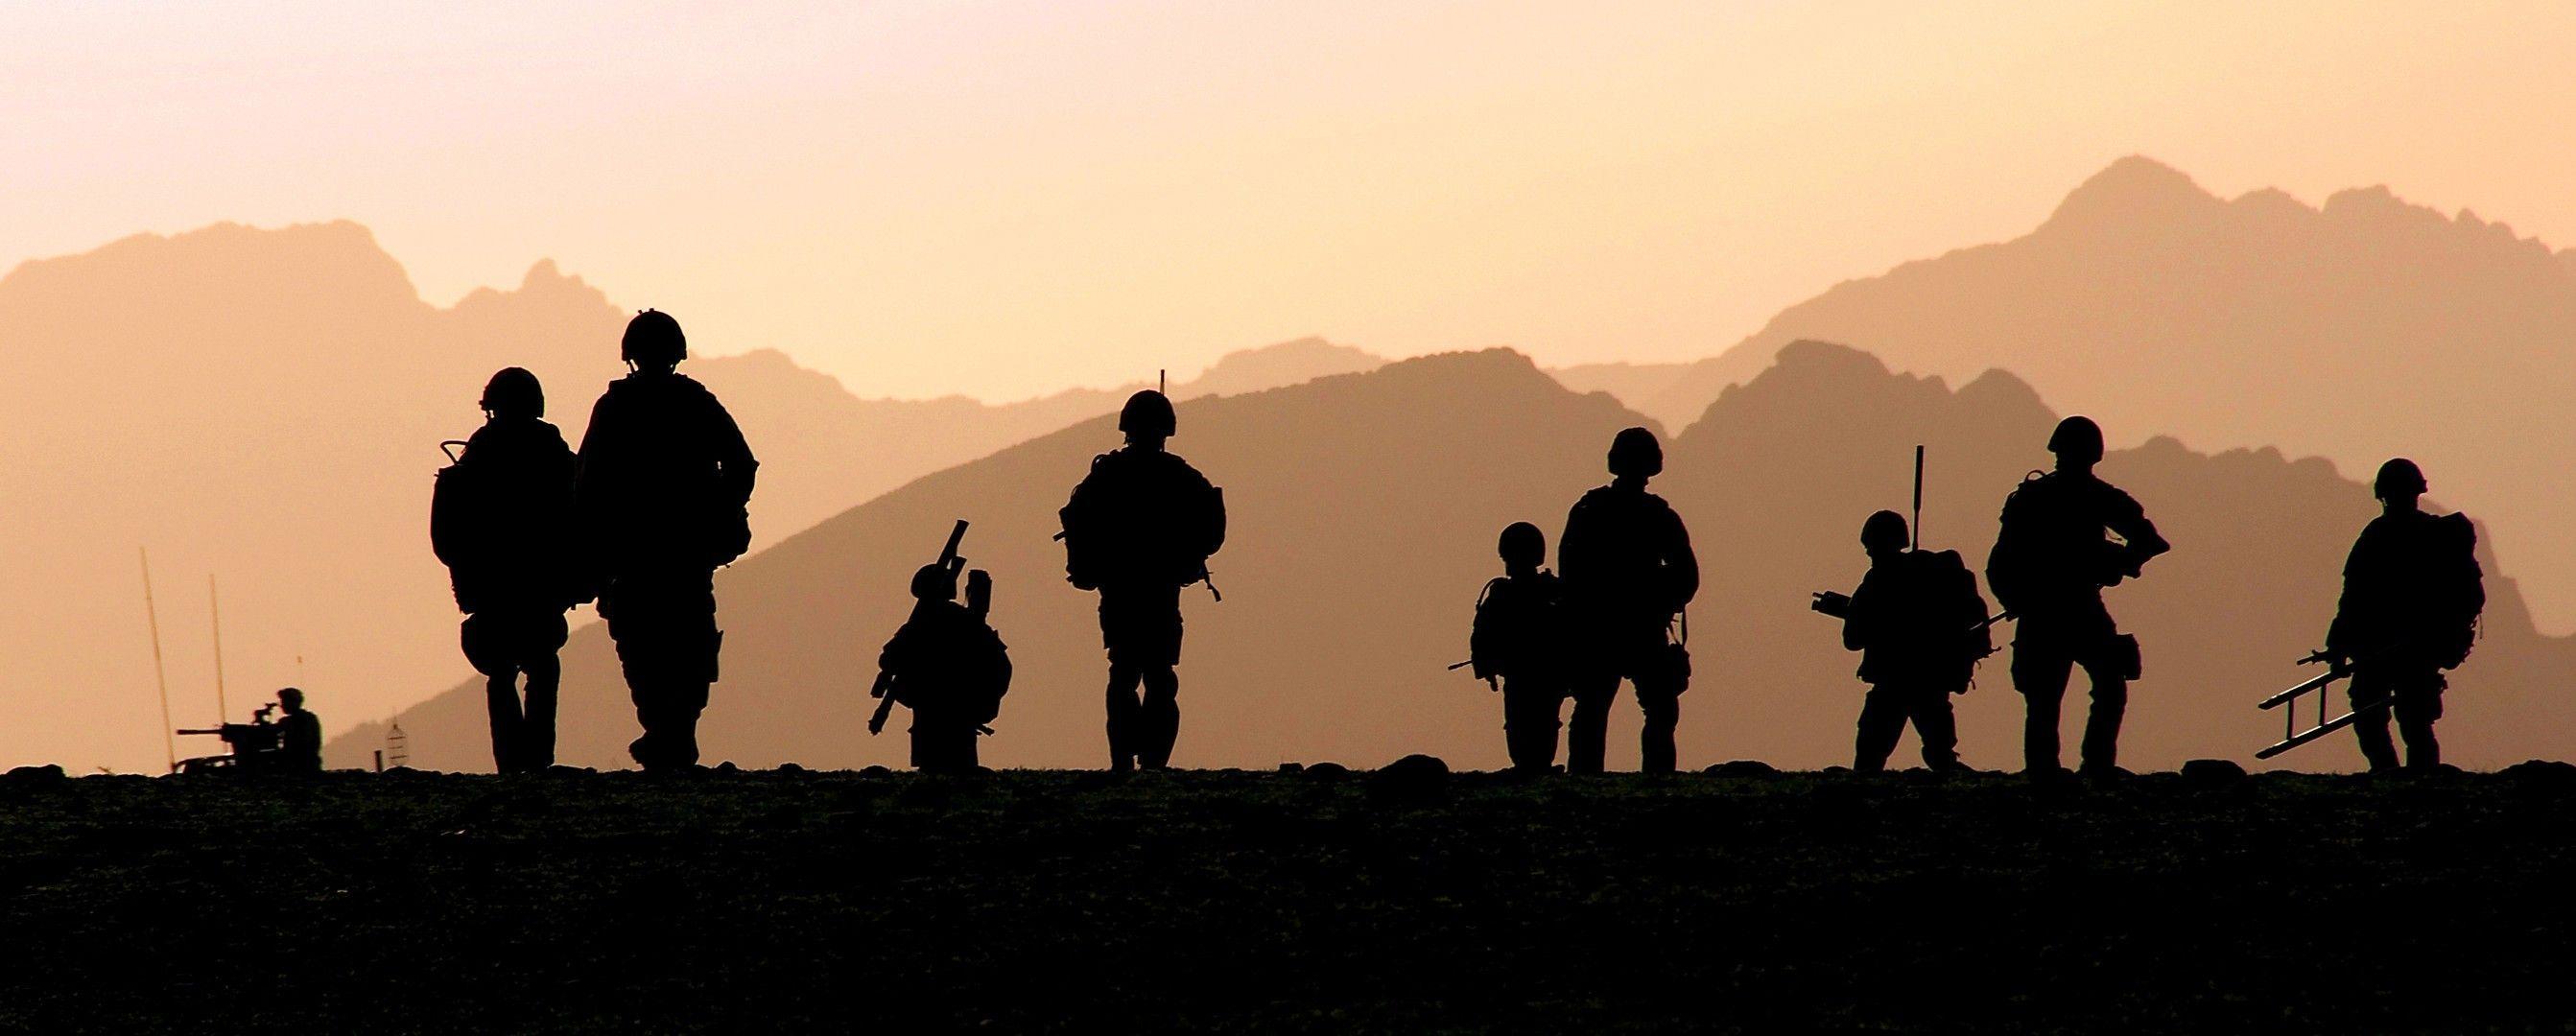 military, Silhouette, Royal Marines Wallpaper HD / Desktop and Mobile Background. Royal marines, Soldier silhouette, Military